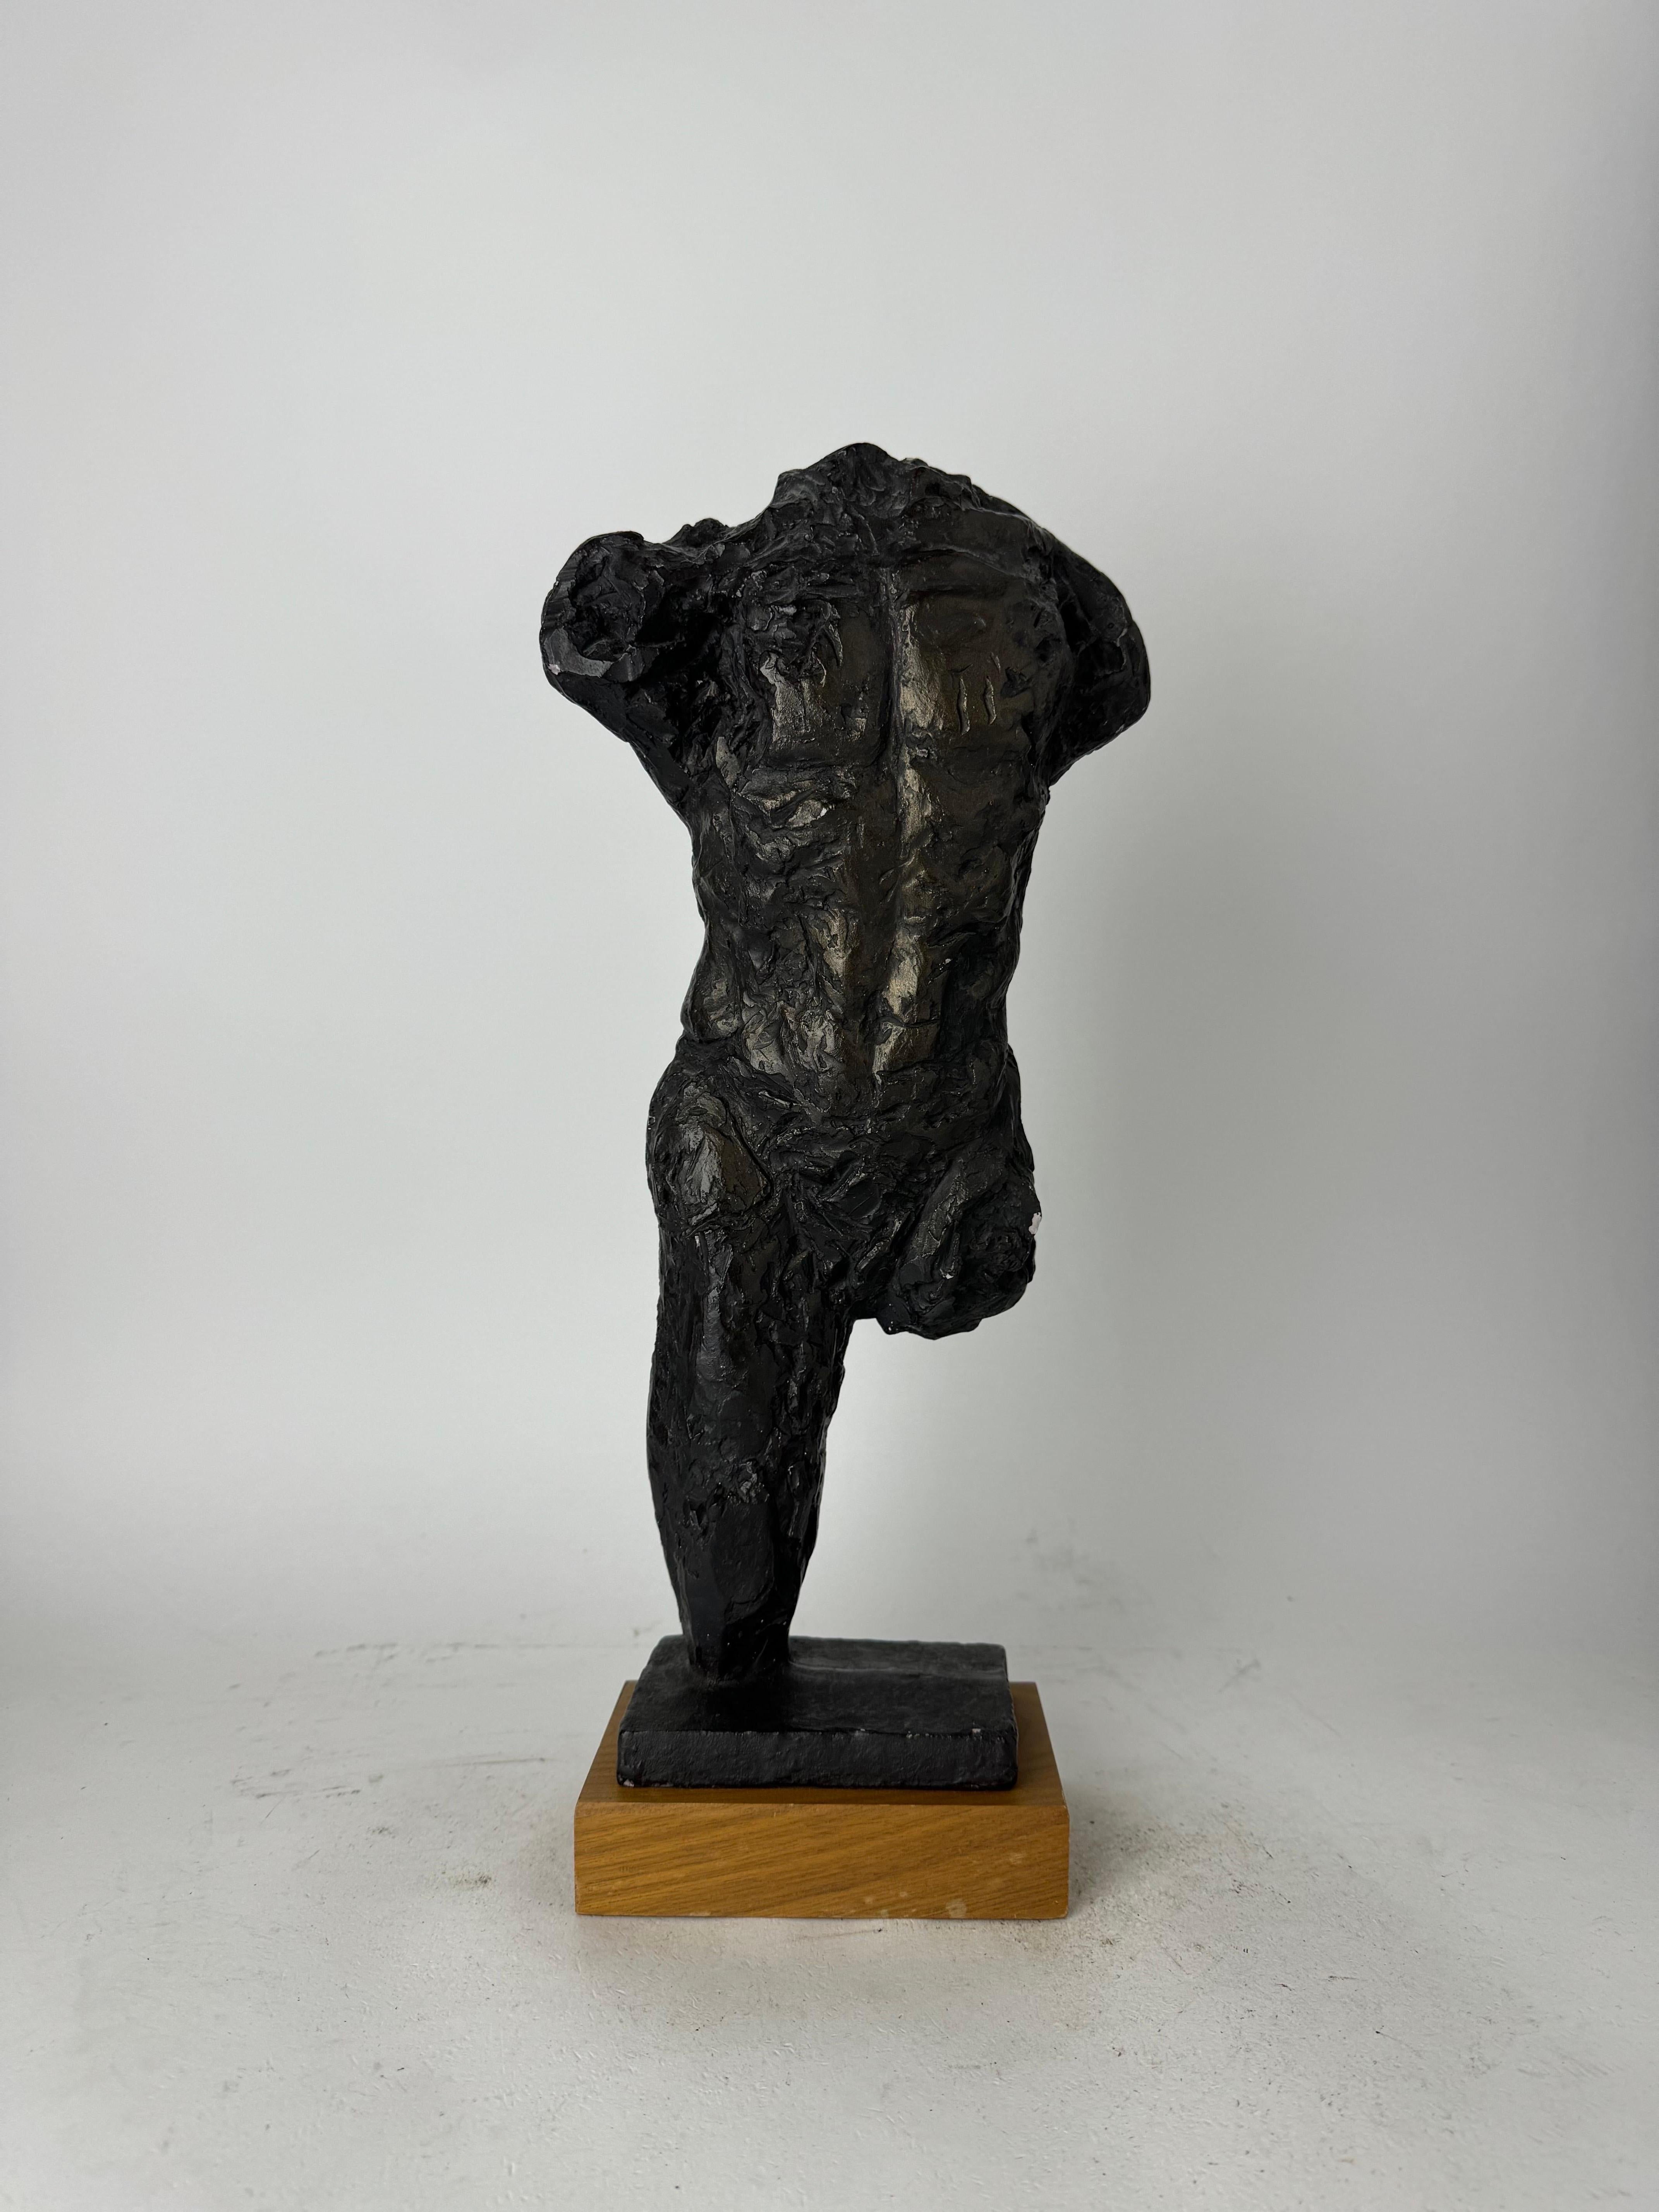 For sale we have a great reproduction of Auguste Rodin's 